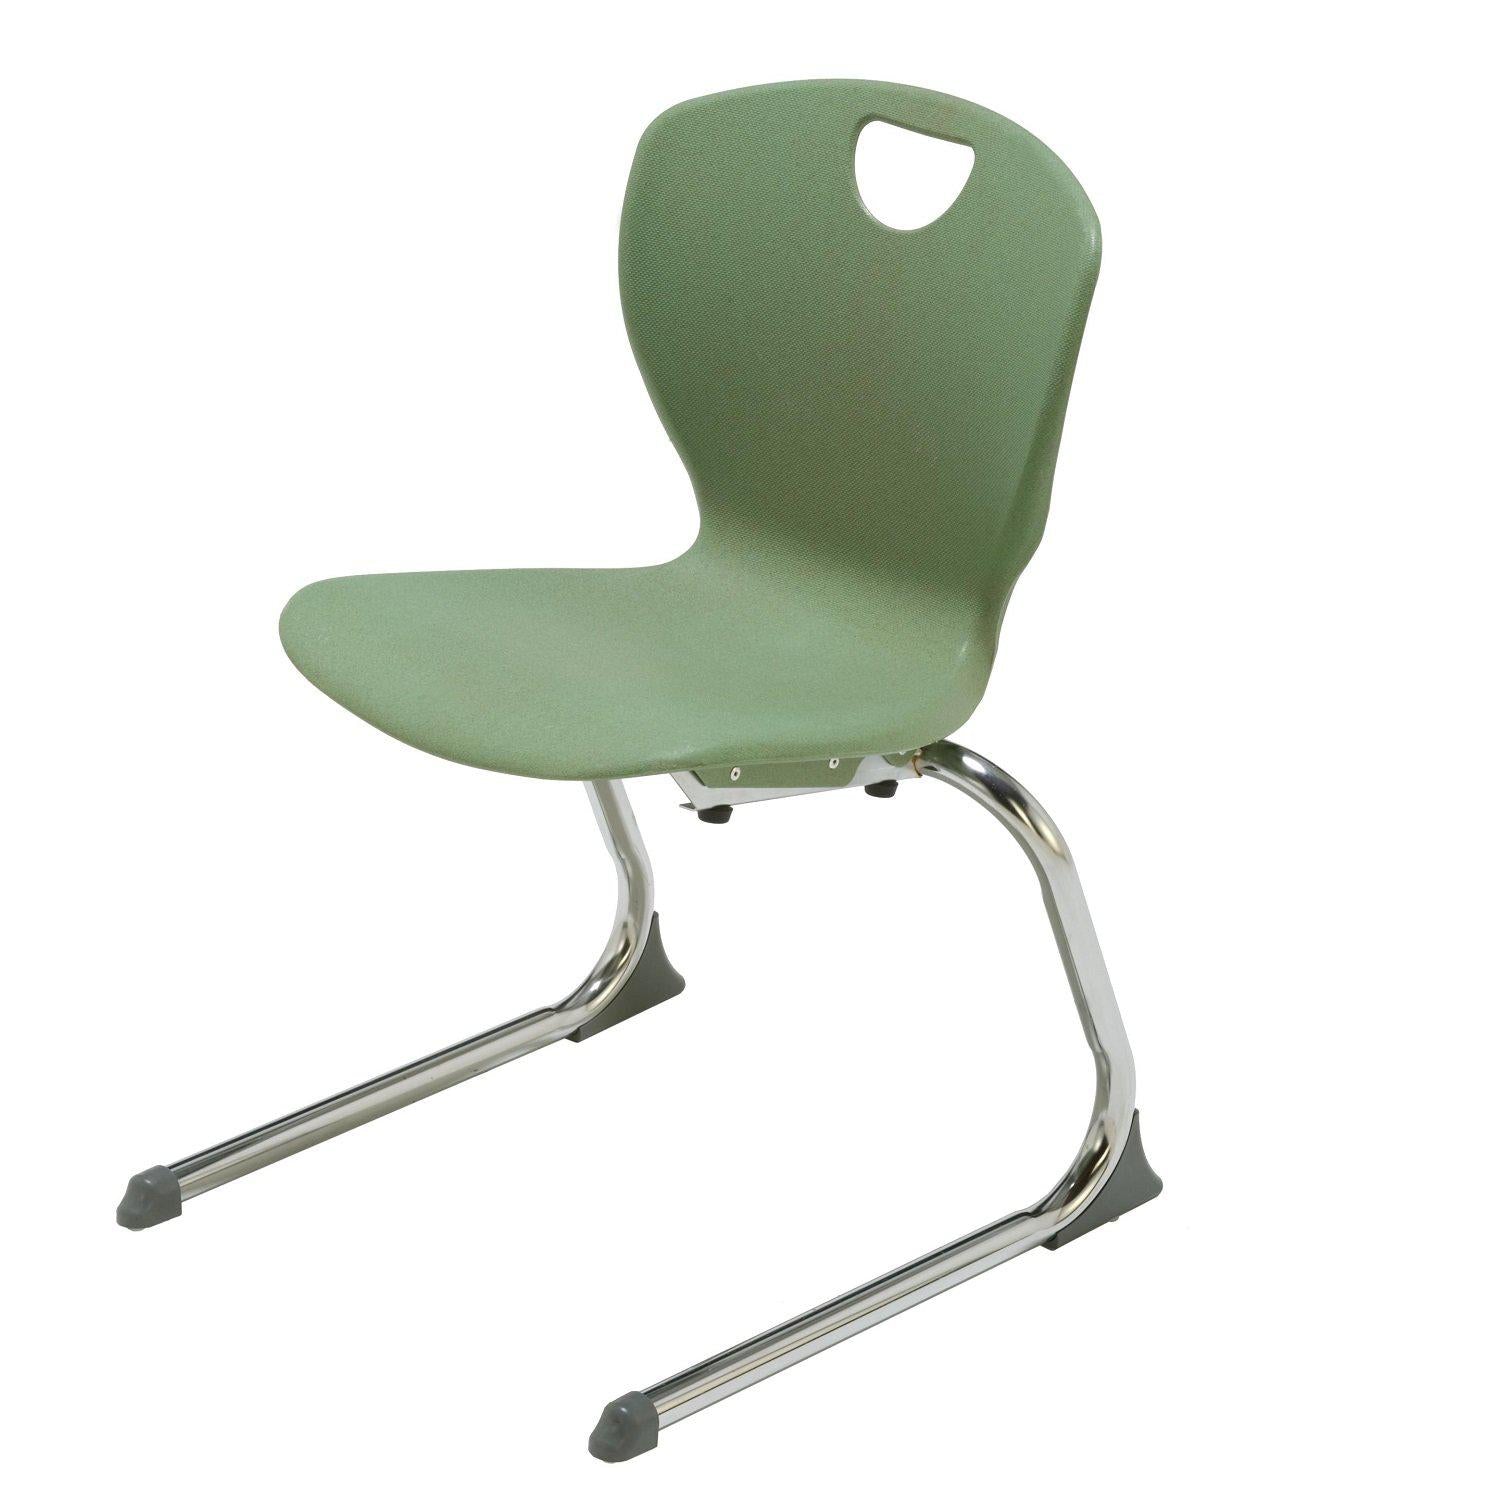 Ovation Cantilever Stacking Student Chair, 18" Seat Height